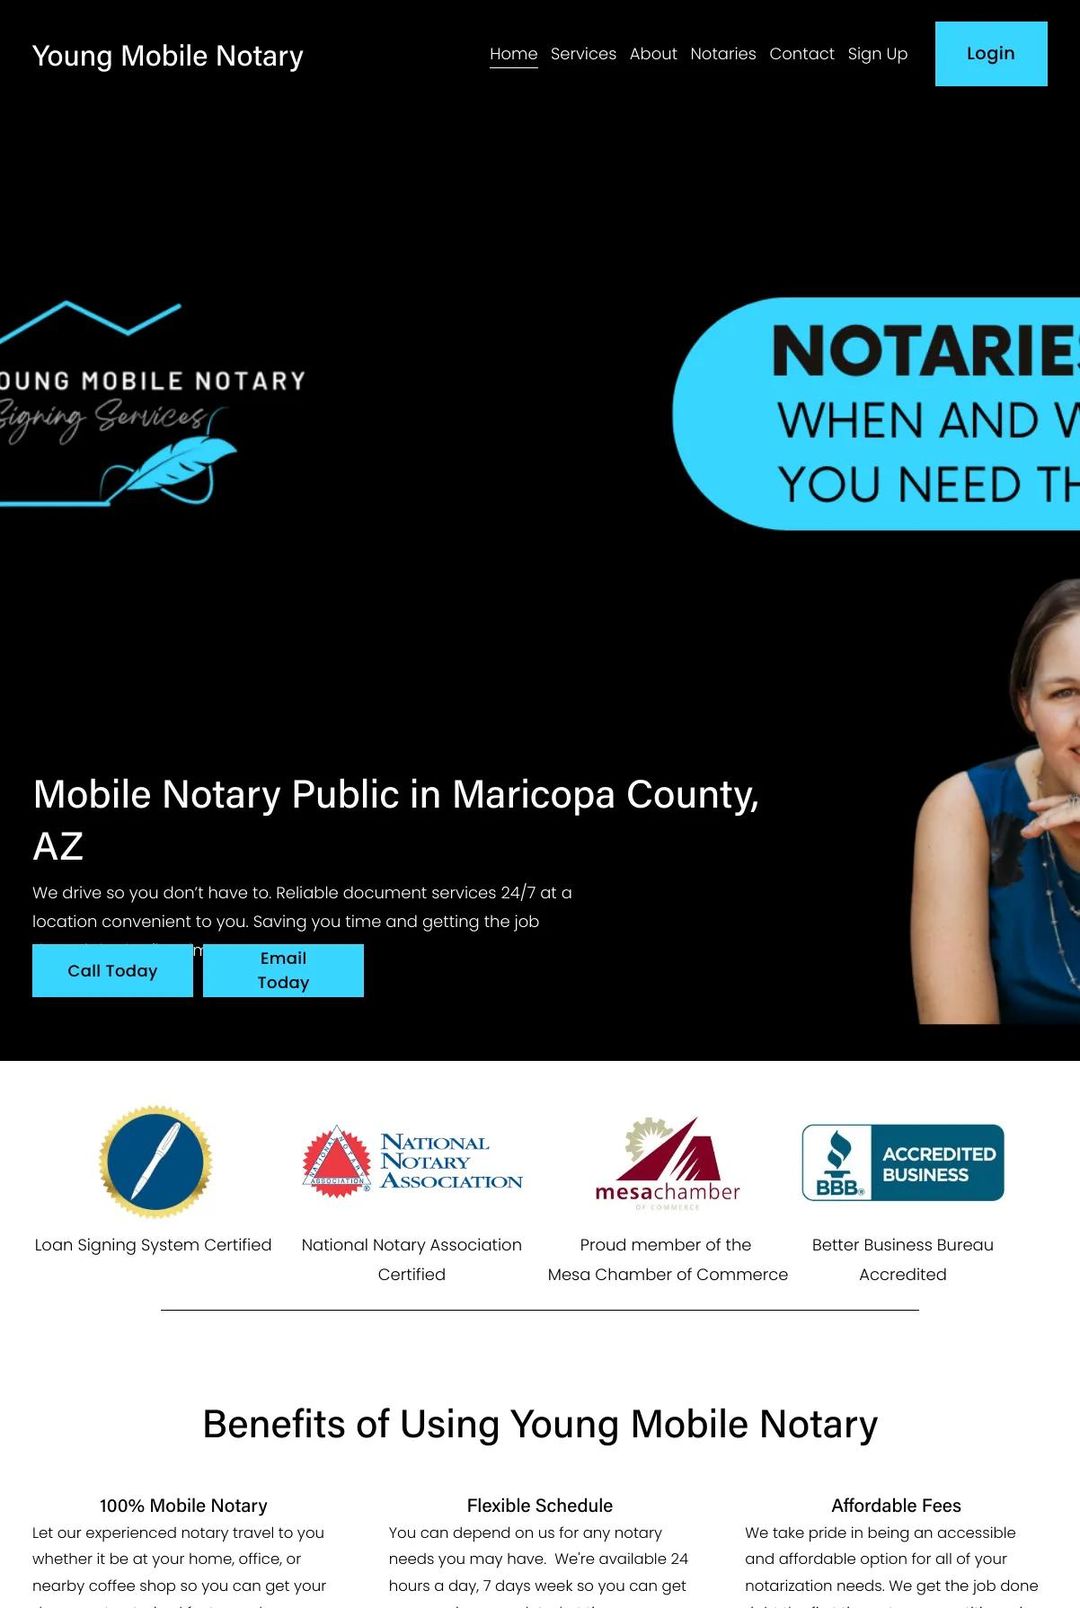 Screenshot 1 of Young Mobile Notary (Example Squarespace Notary Website)